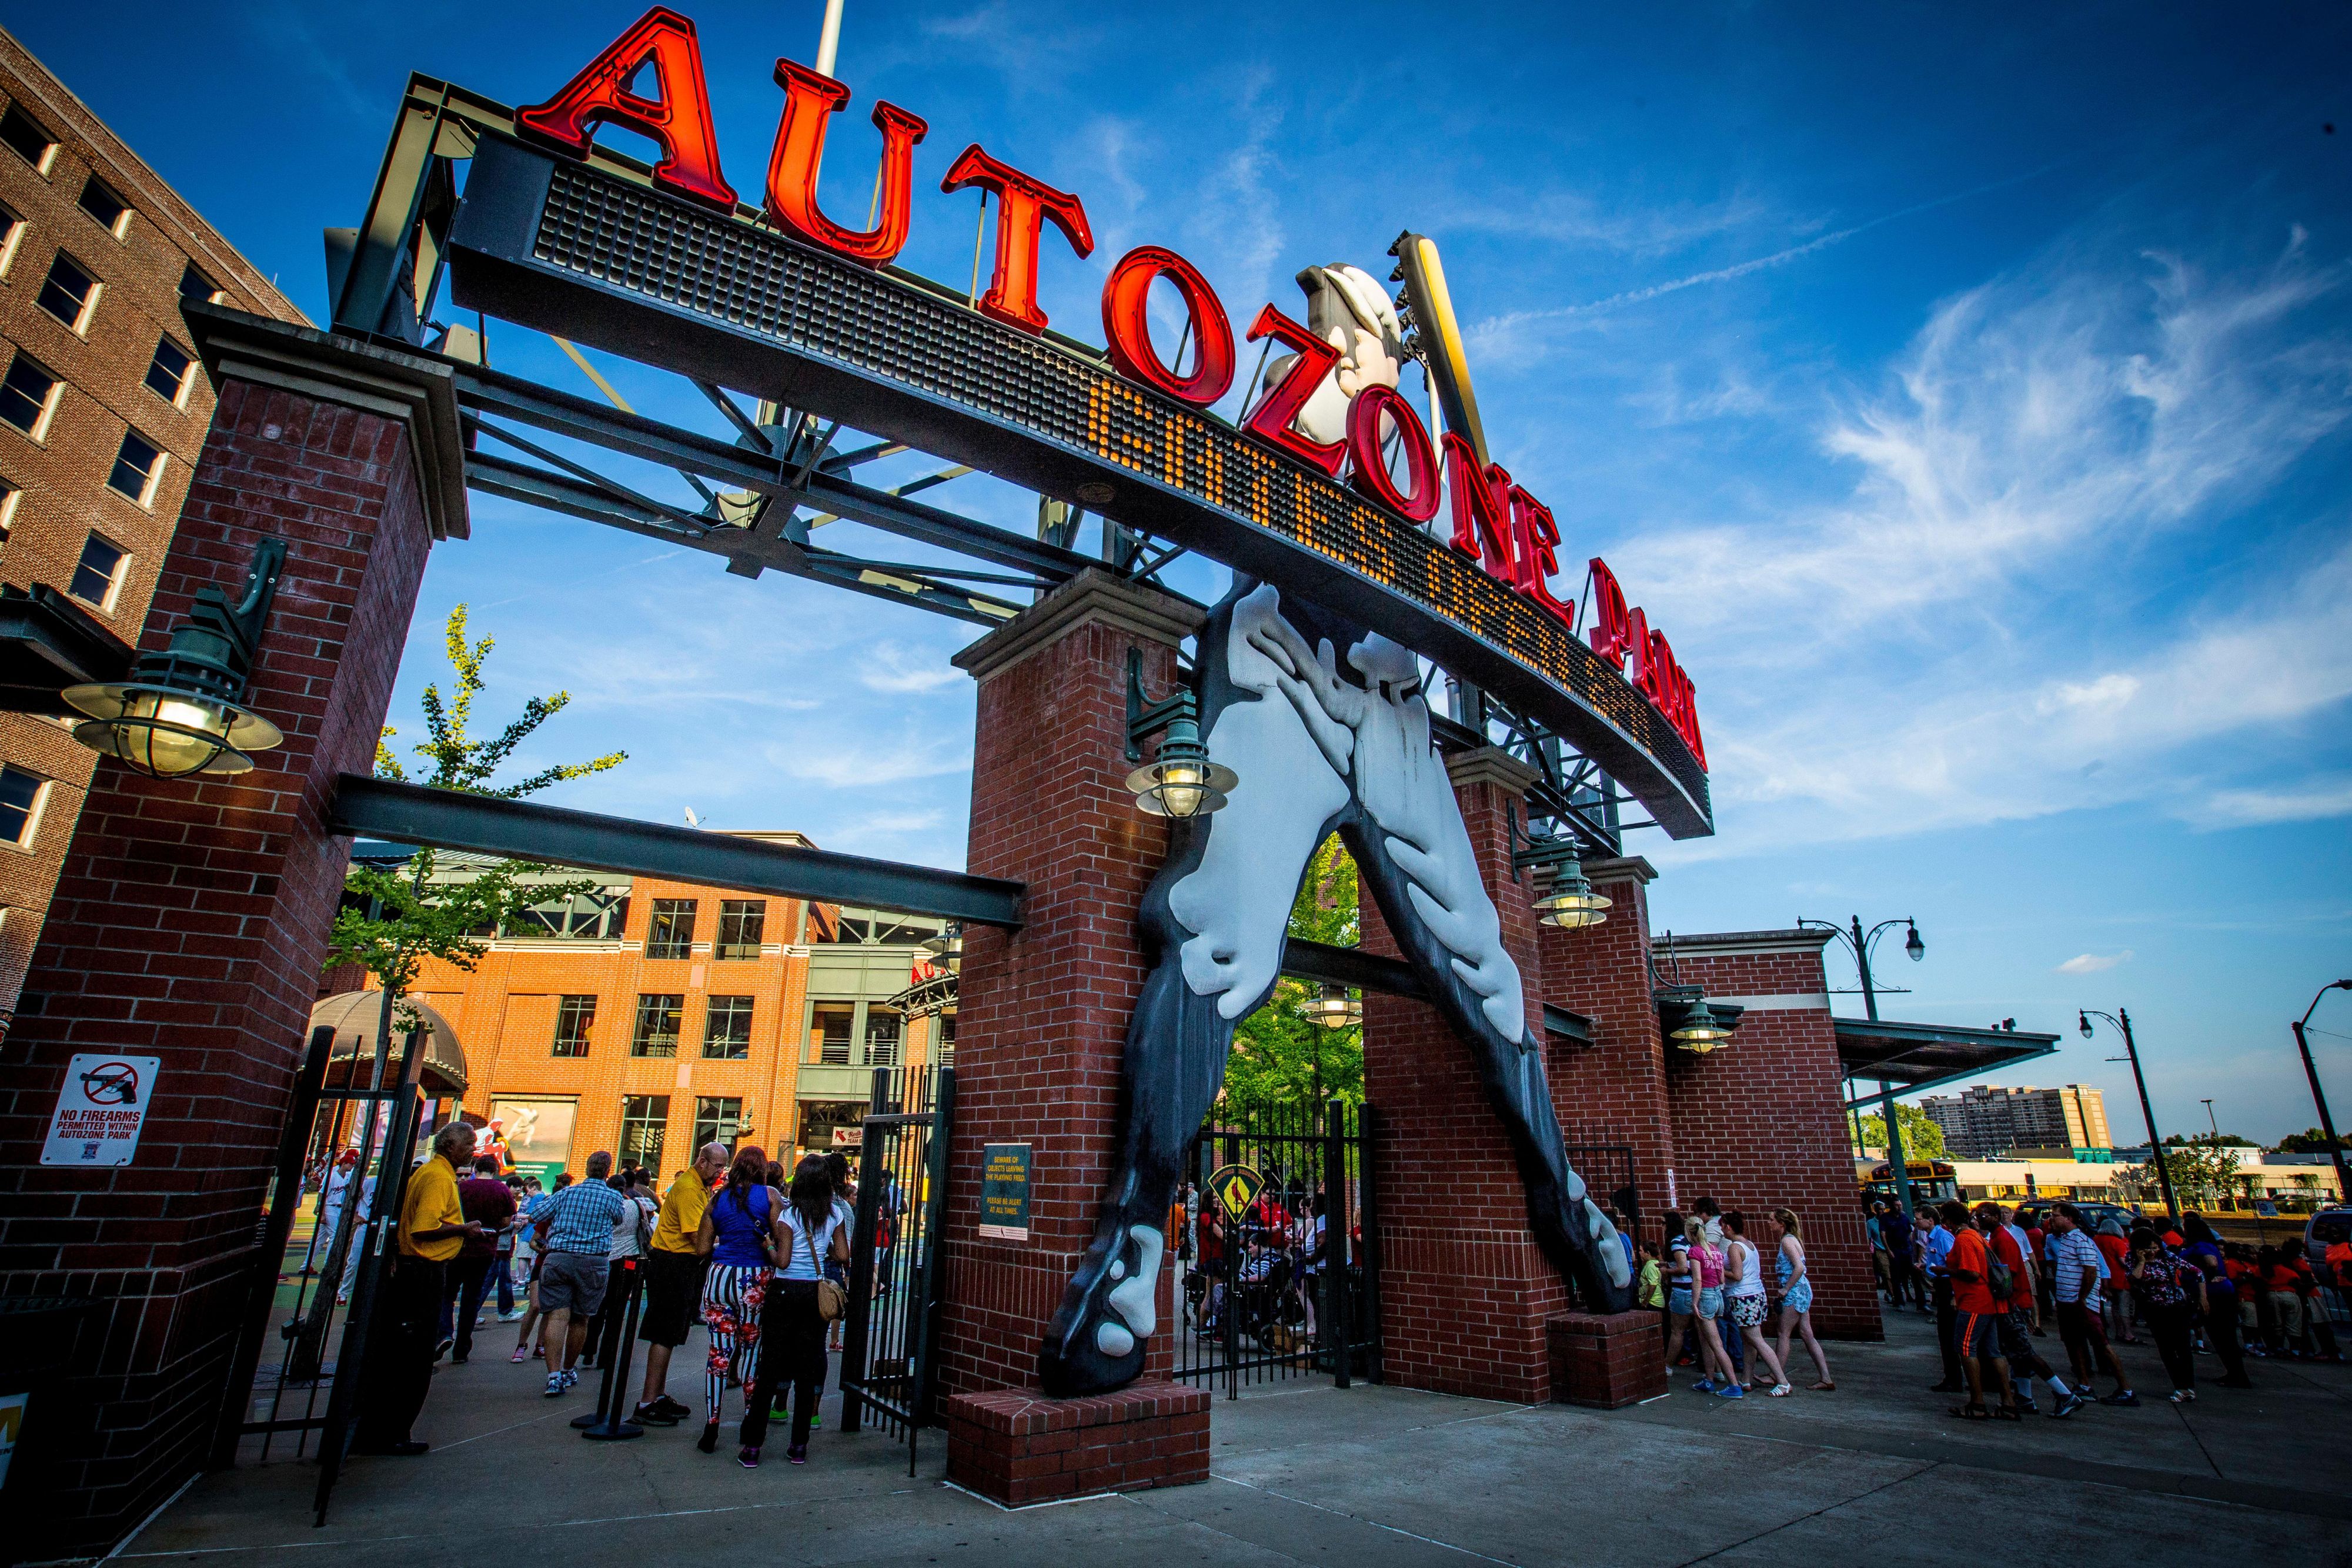 Take our free shuttle to watch the Redbirds at Autozone Park 